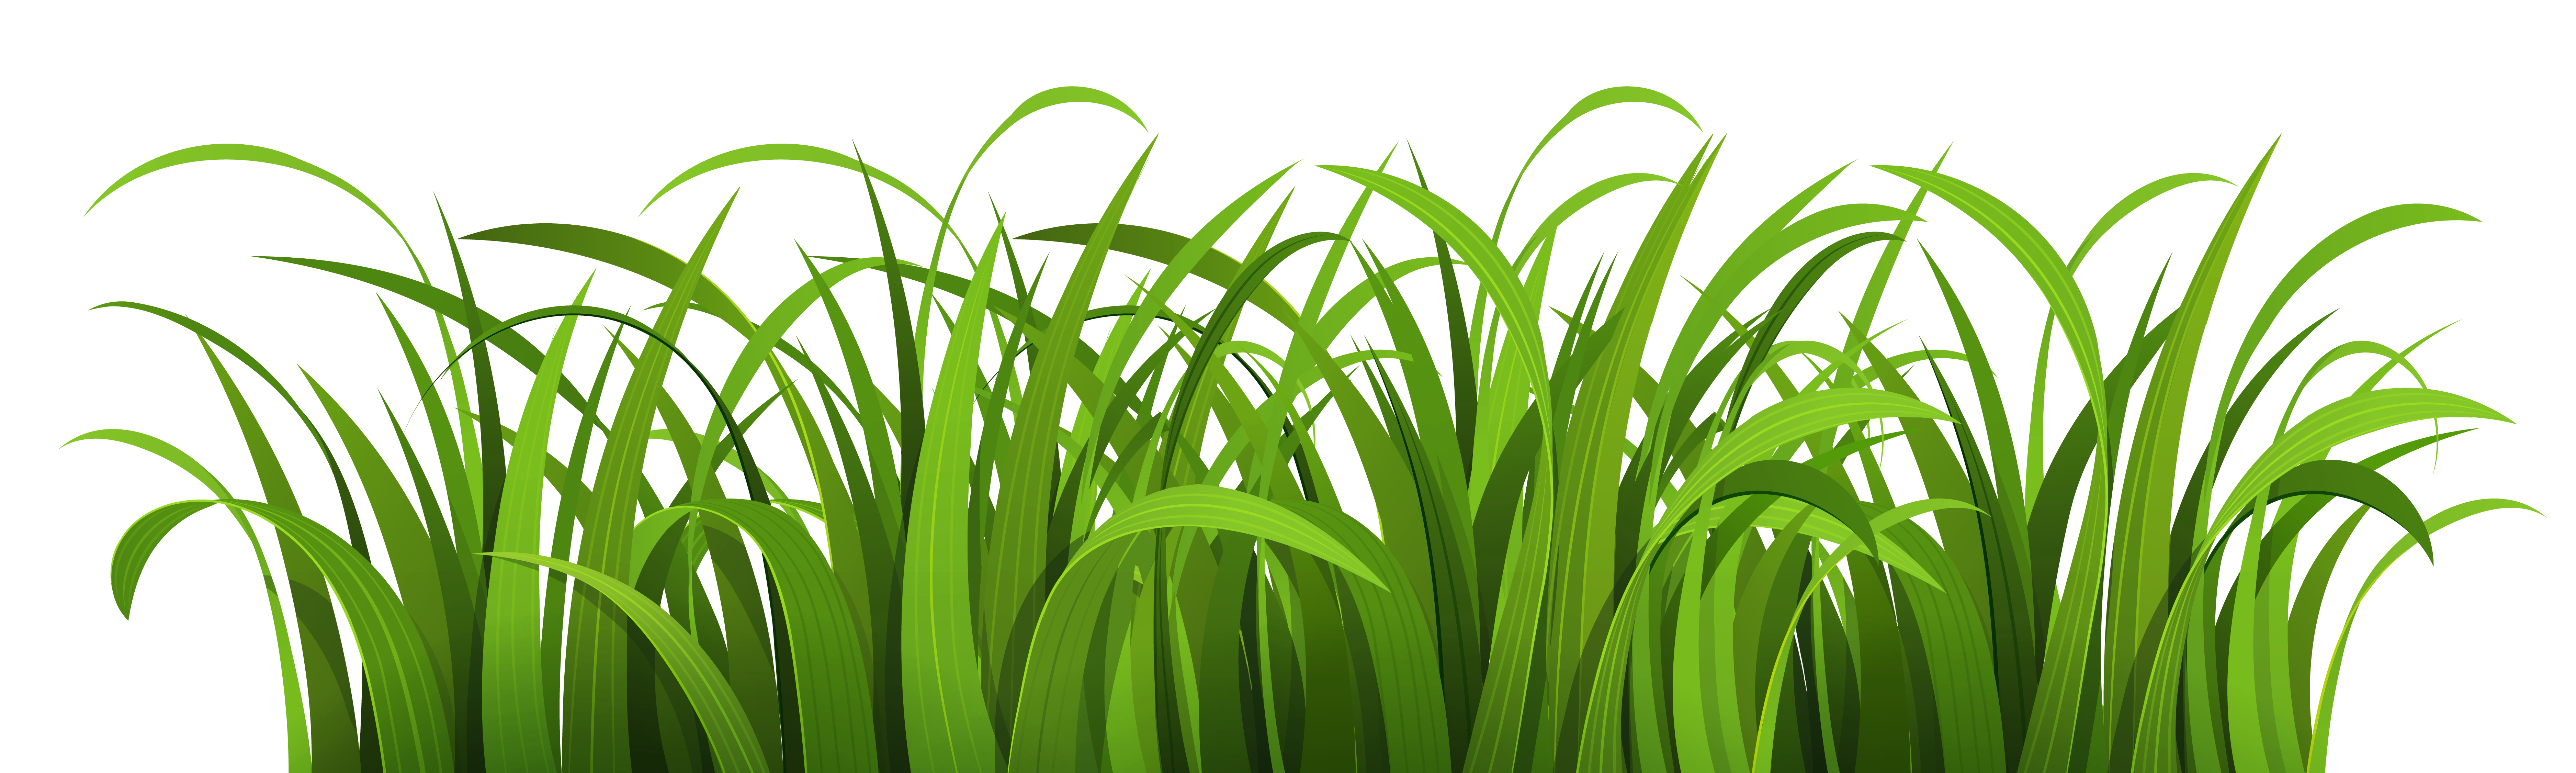 Grass clipart vector, Grass vector Transparent FREE for download on